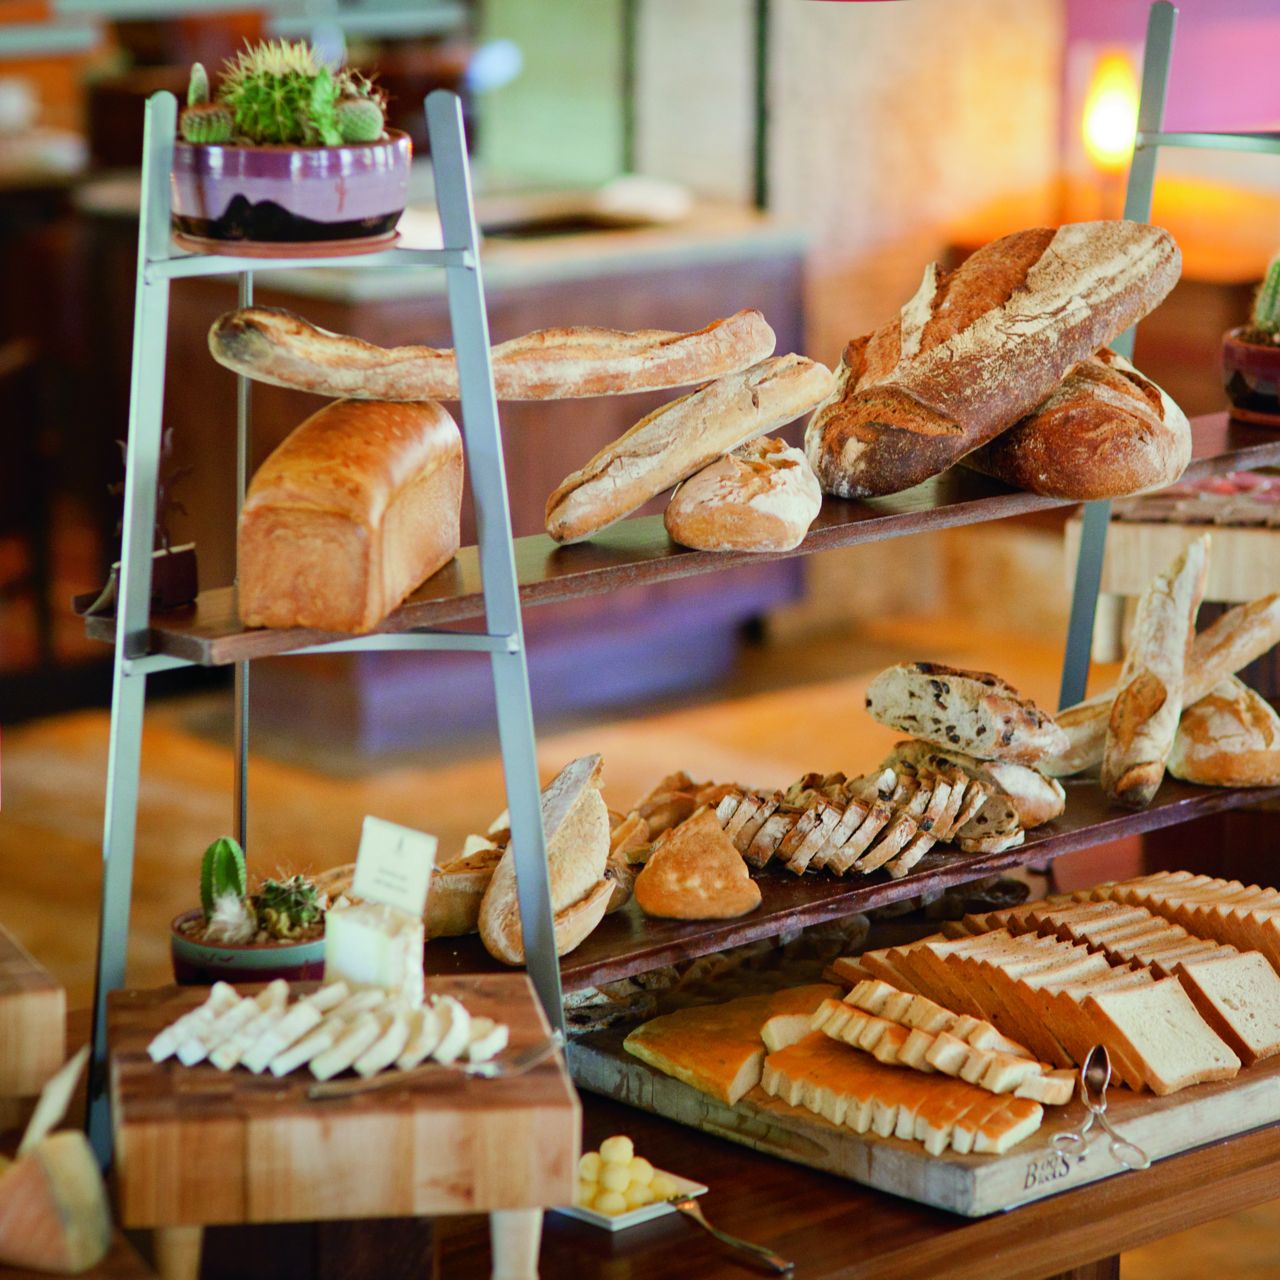 A display of breads, cheeses and slices meats